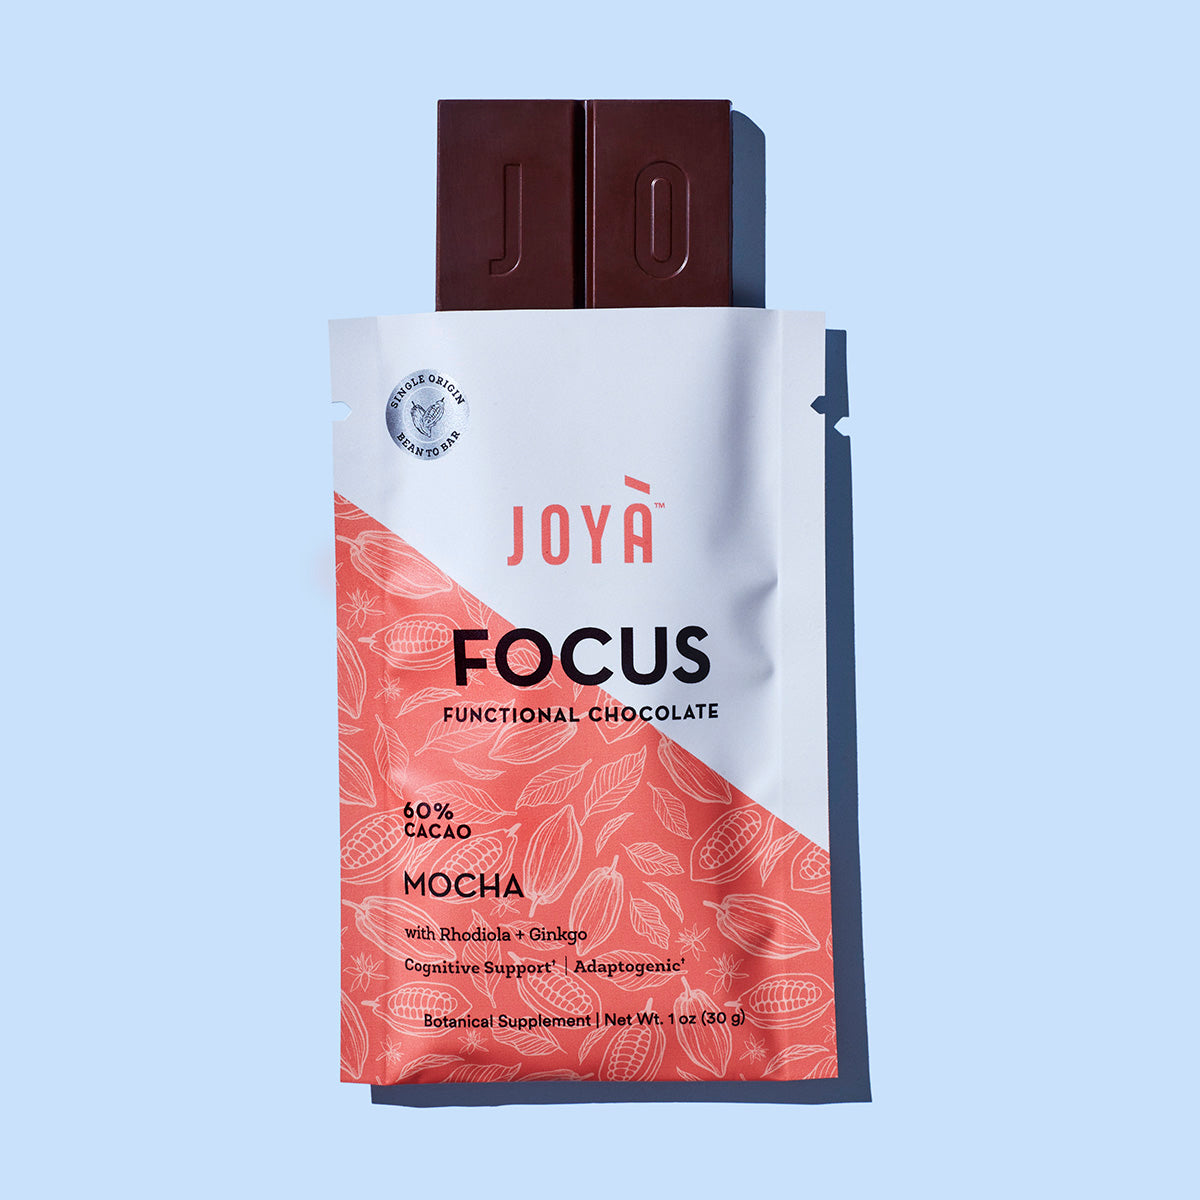 Focus Functional Chocolate sitting on a blue tabletop